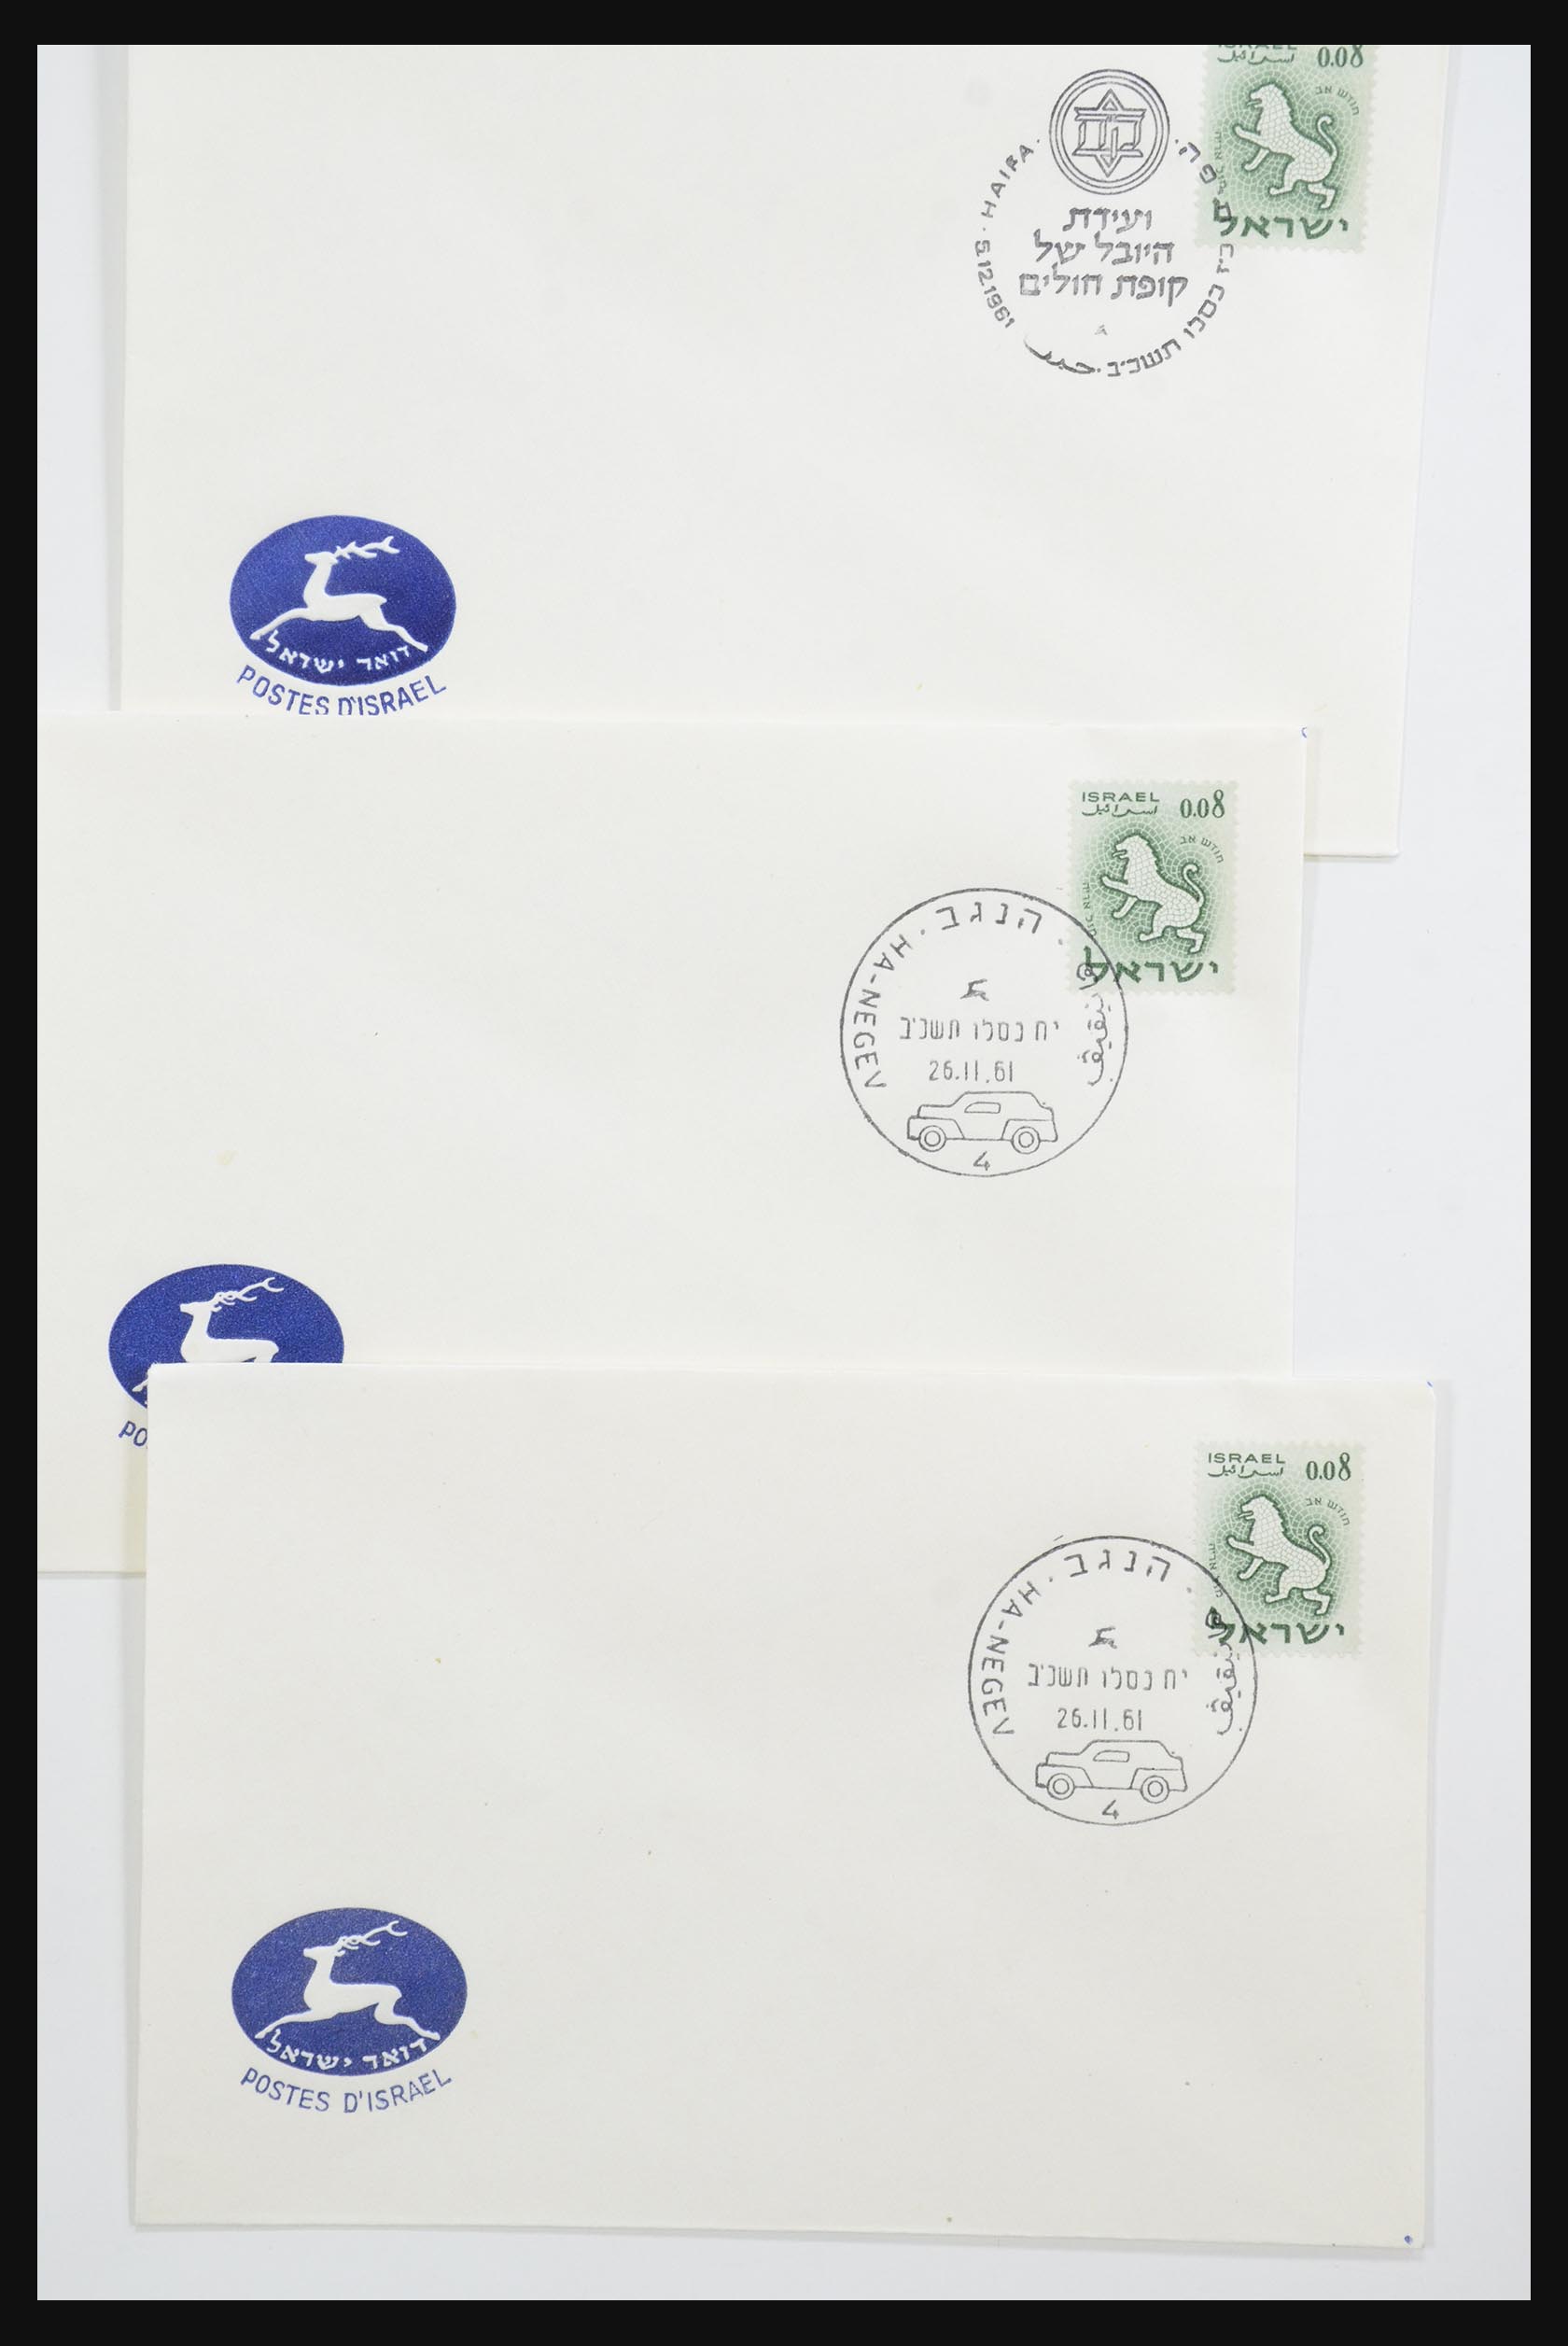 31924 048 - 31924 Israel first day cover collection 1957-2003.